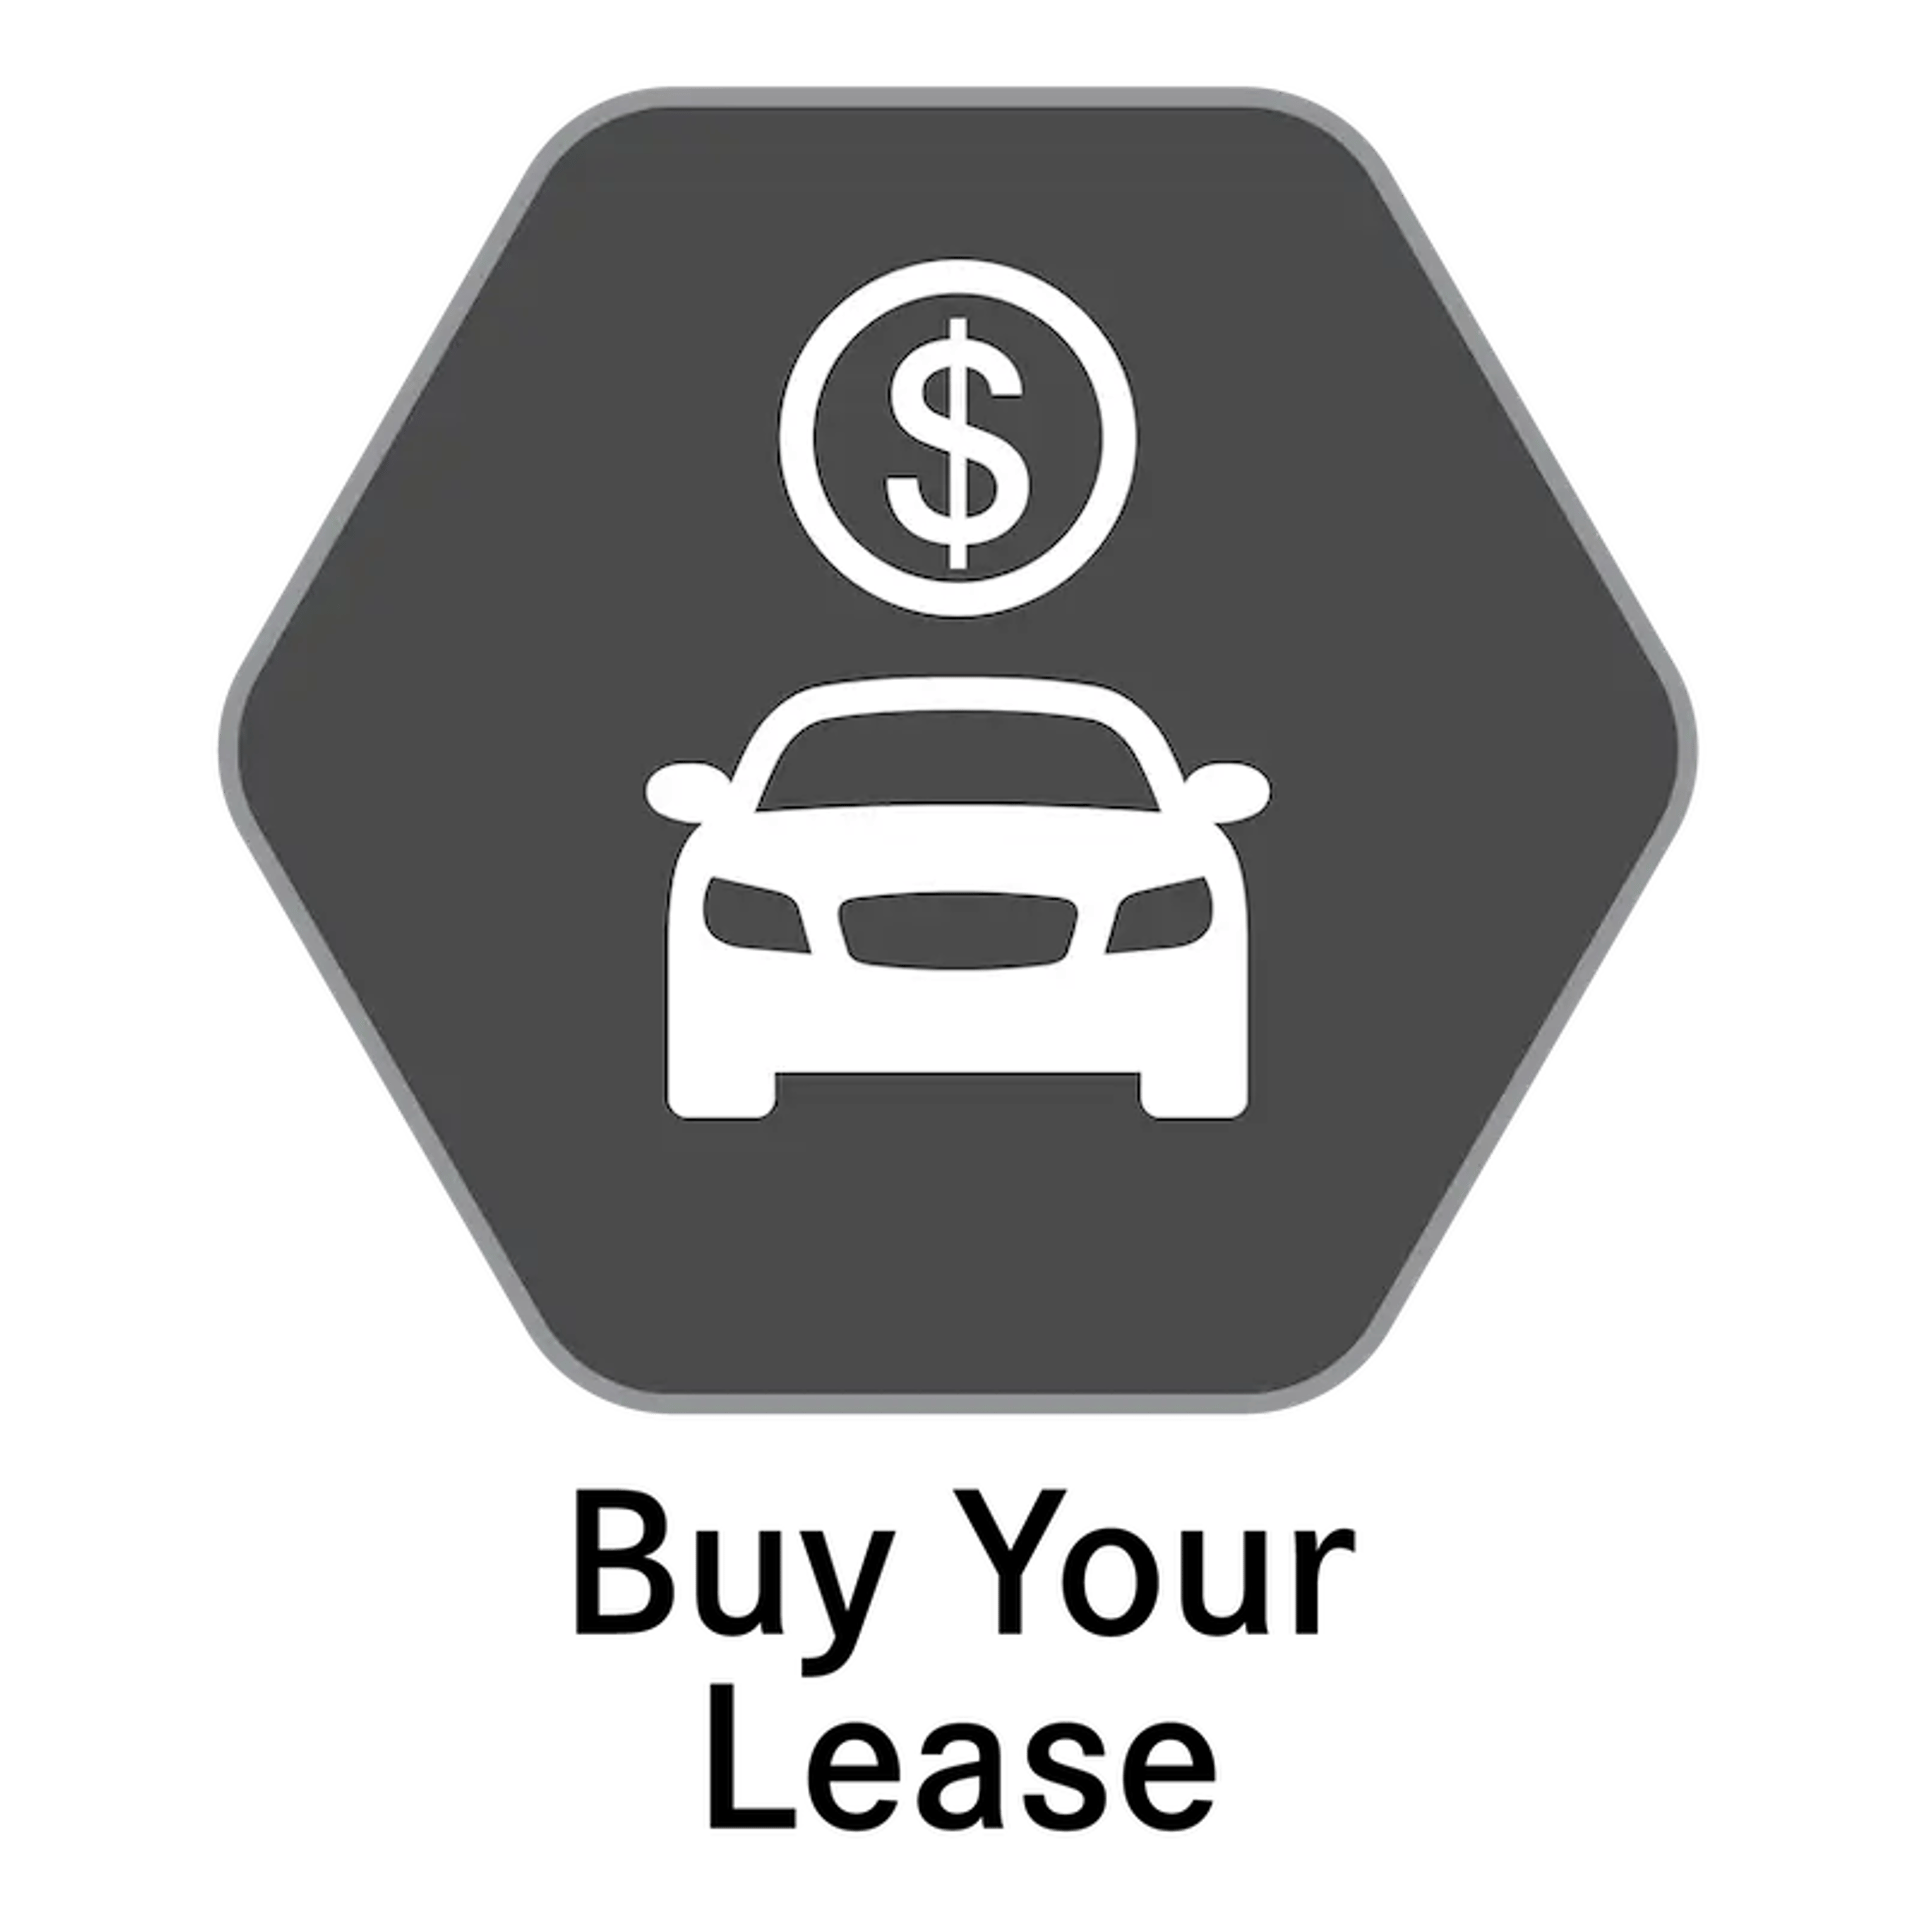 Buy-Your-Lease